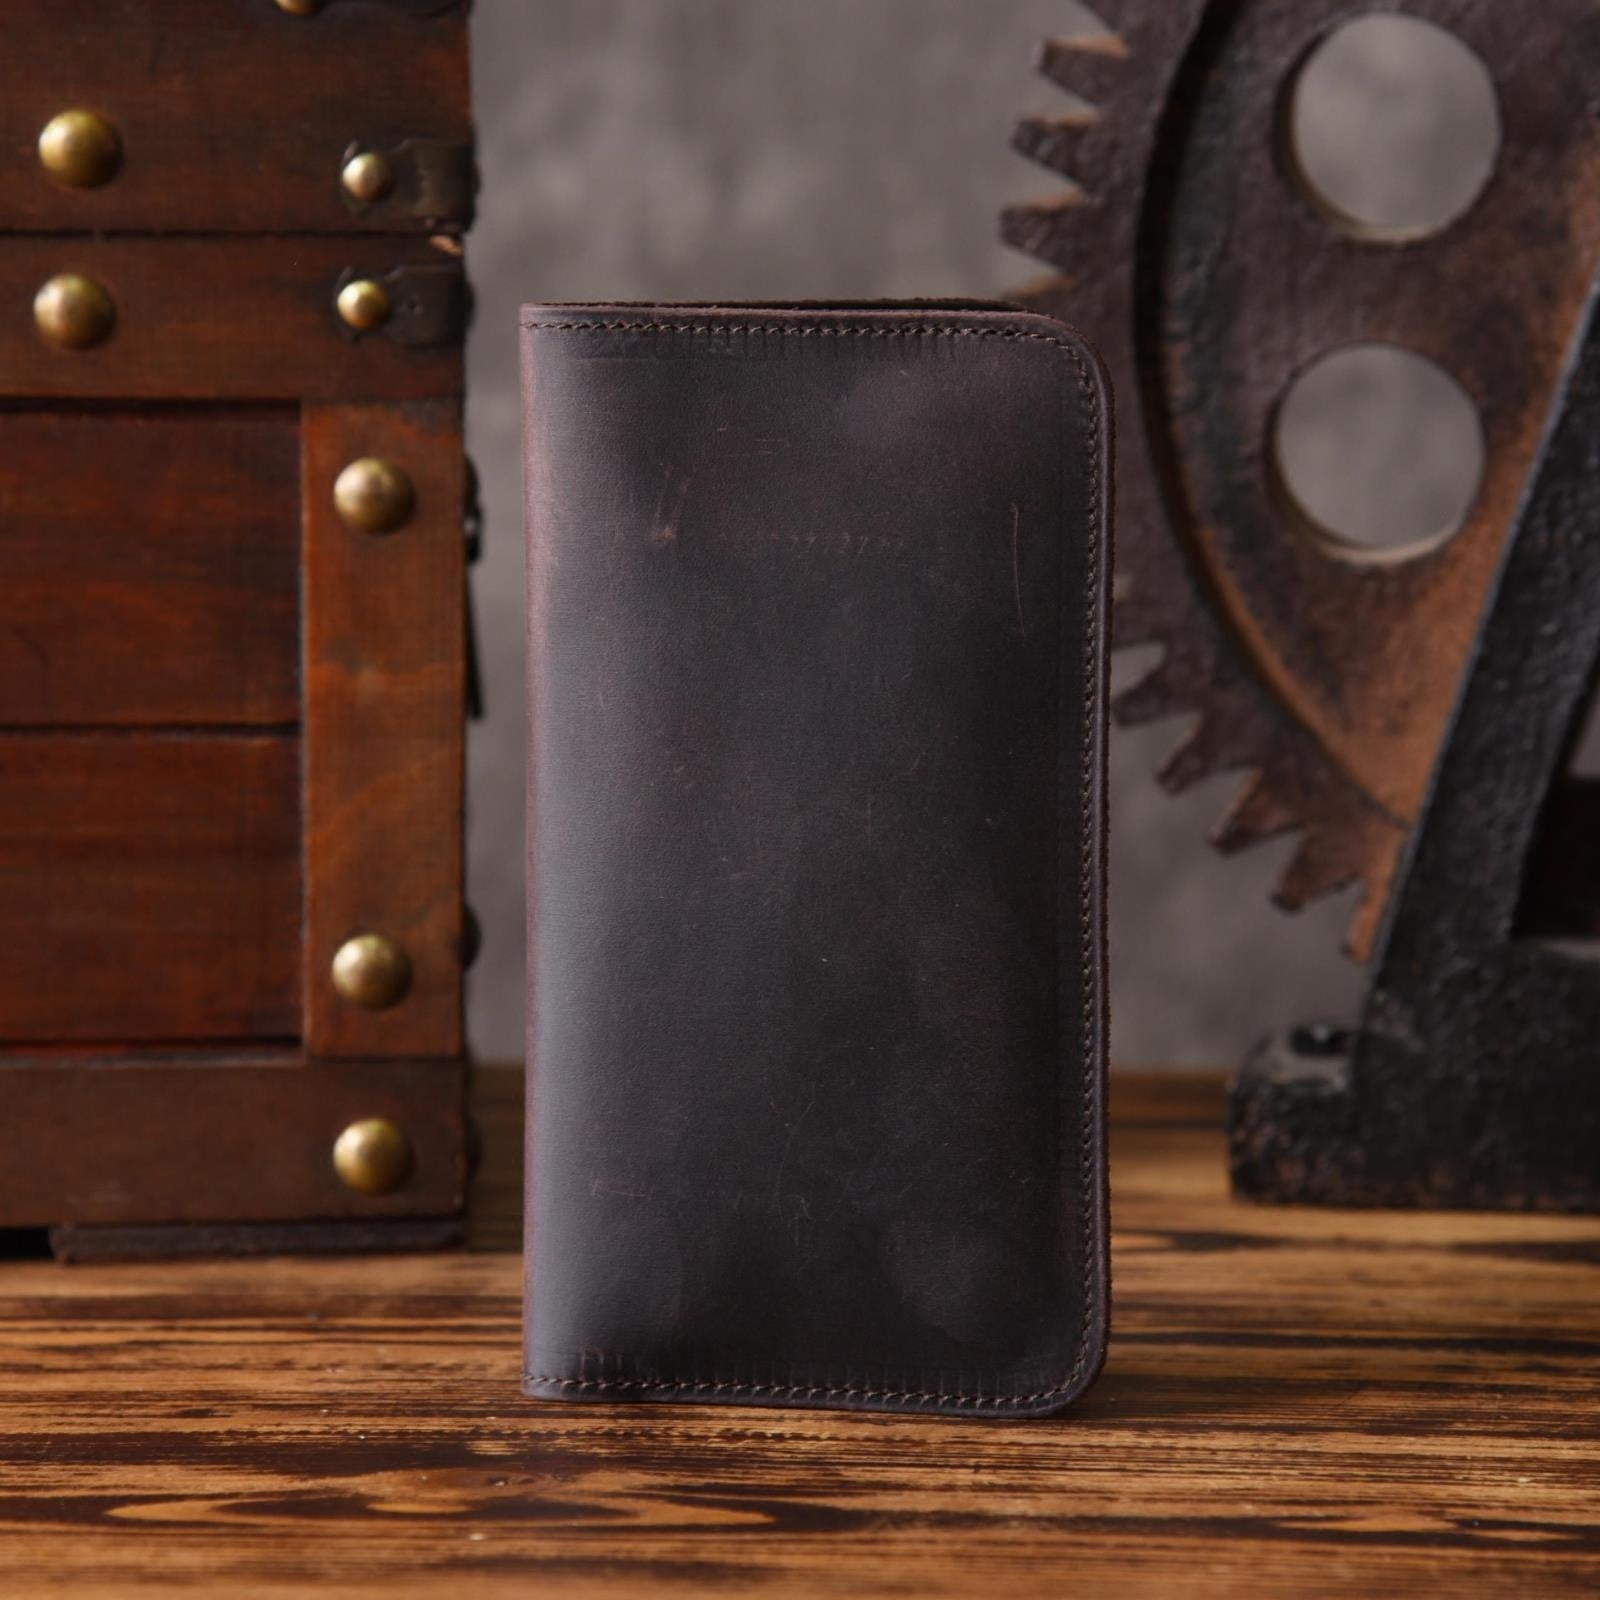 Handmade Leather Mens Cool Long Leather Wallet Slim Phone Clutch Wallet for Men